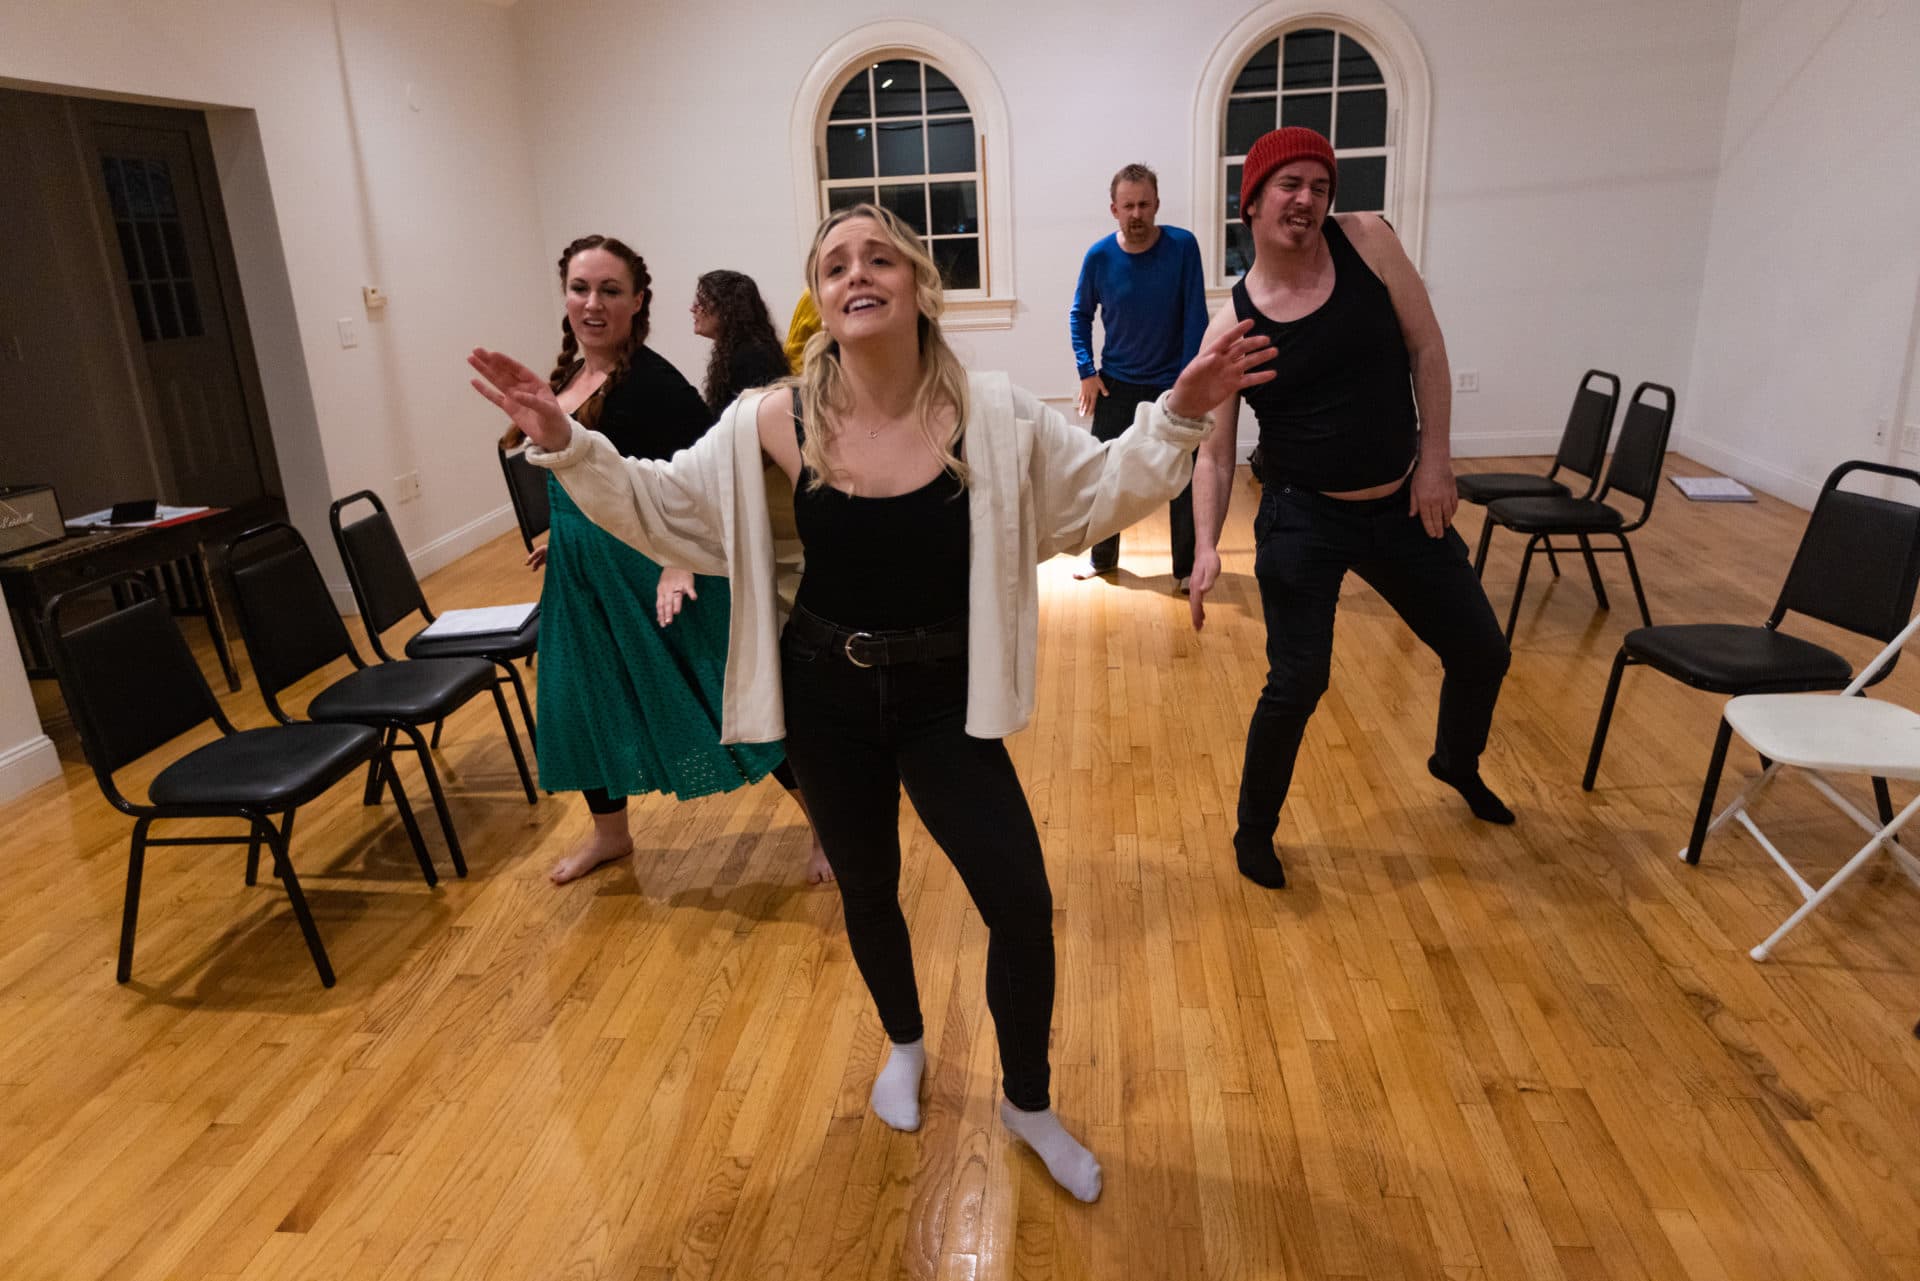 The cast of “T: An MBTA Musical” rehearse at The Center for Arts at the Armory in Somerville ahead of their new season of shows beginning in March at the Rockwell in Davis Square. (Jesse Costa/WBUR)